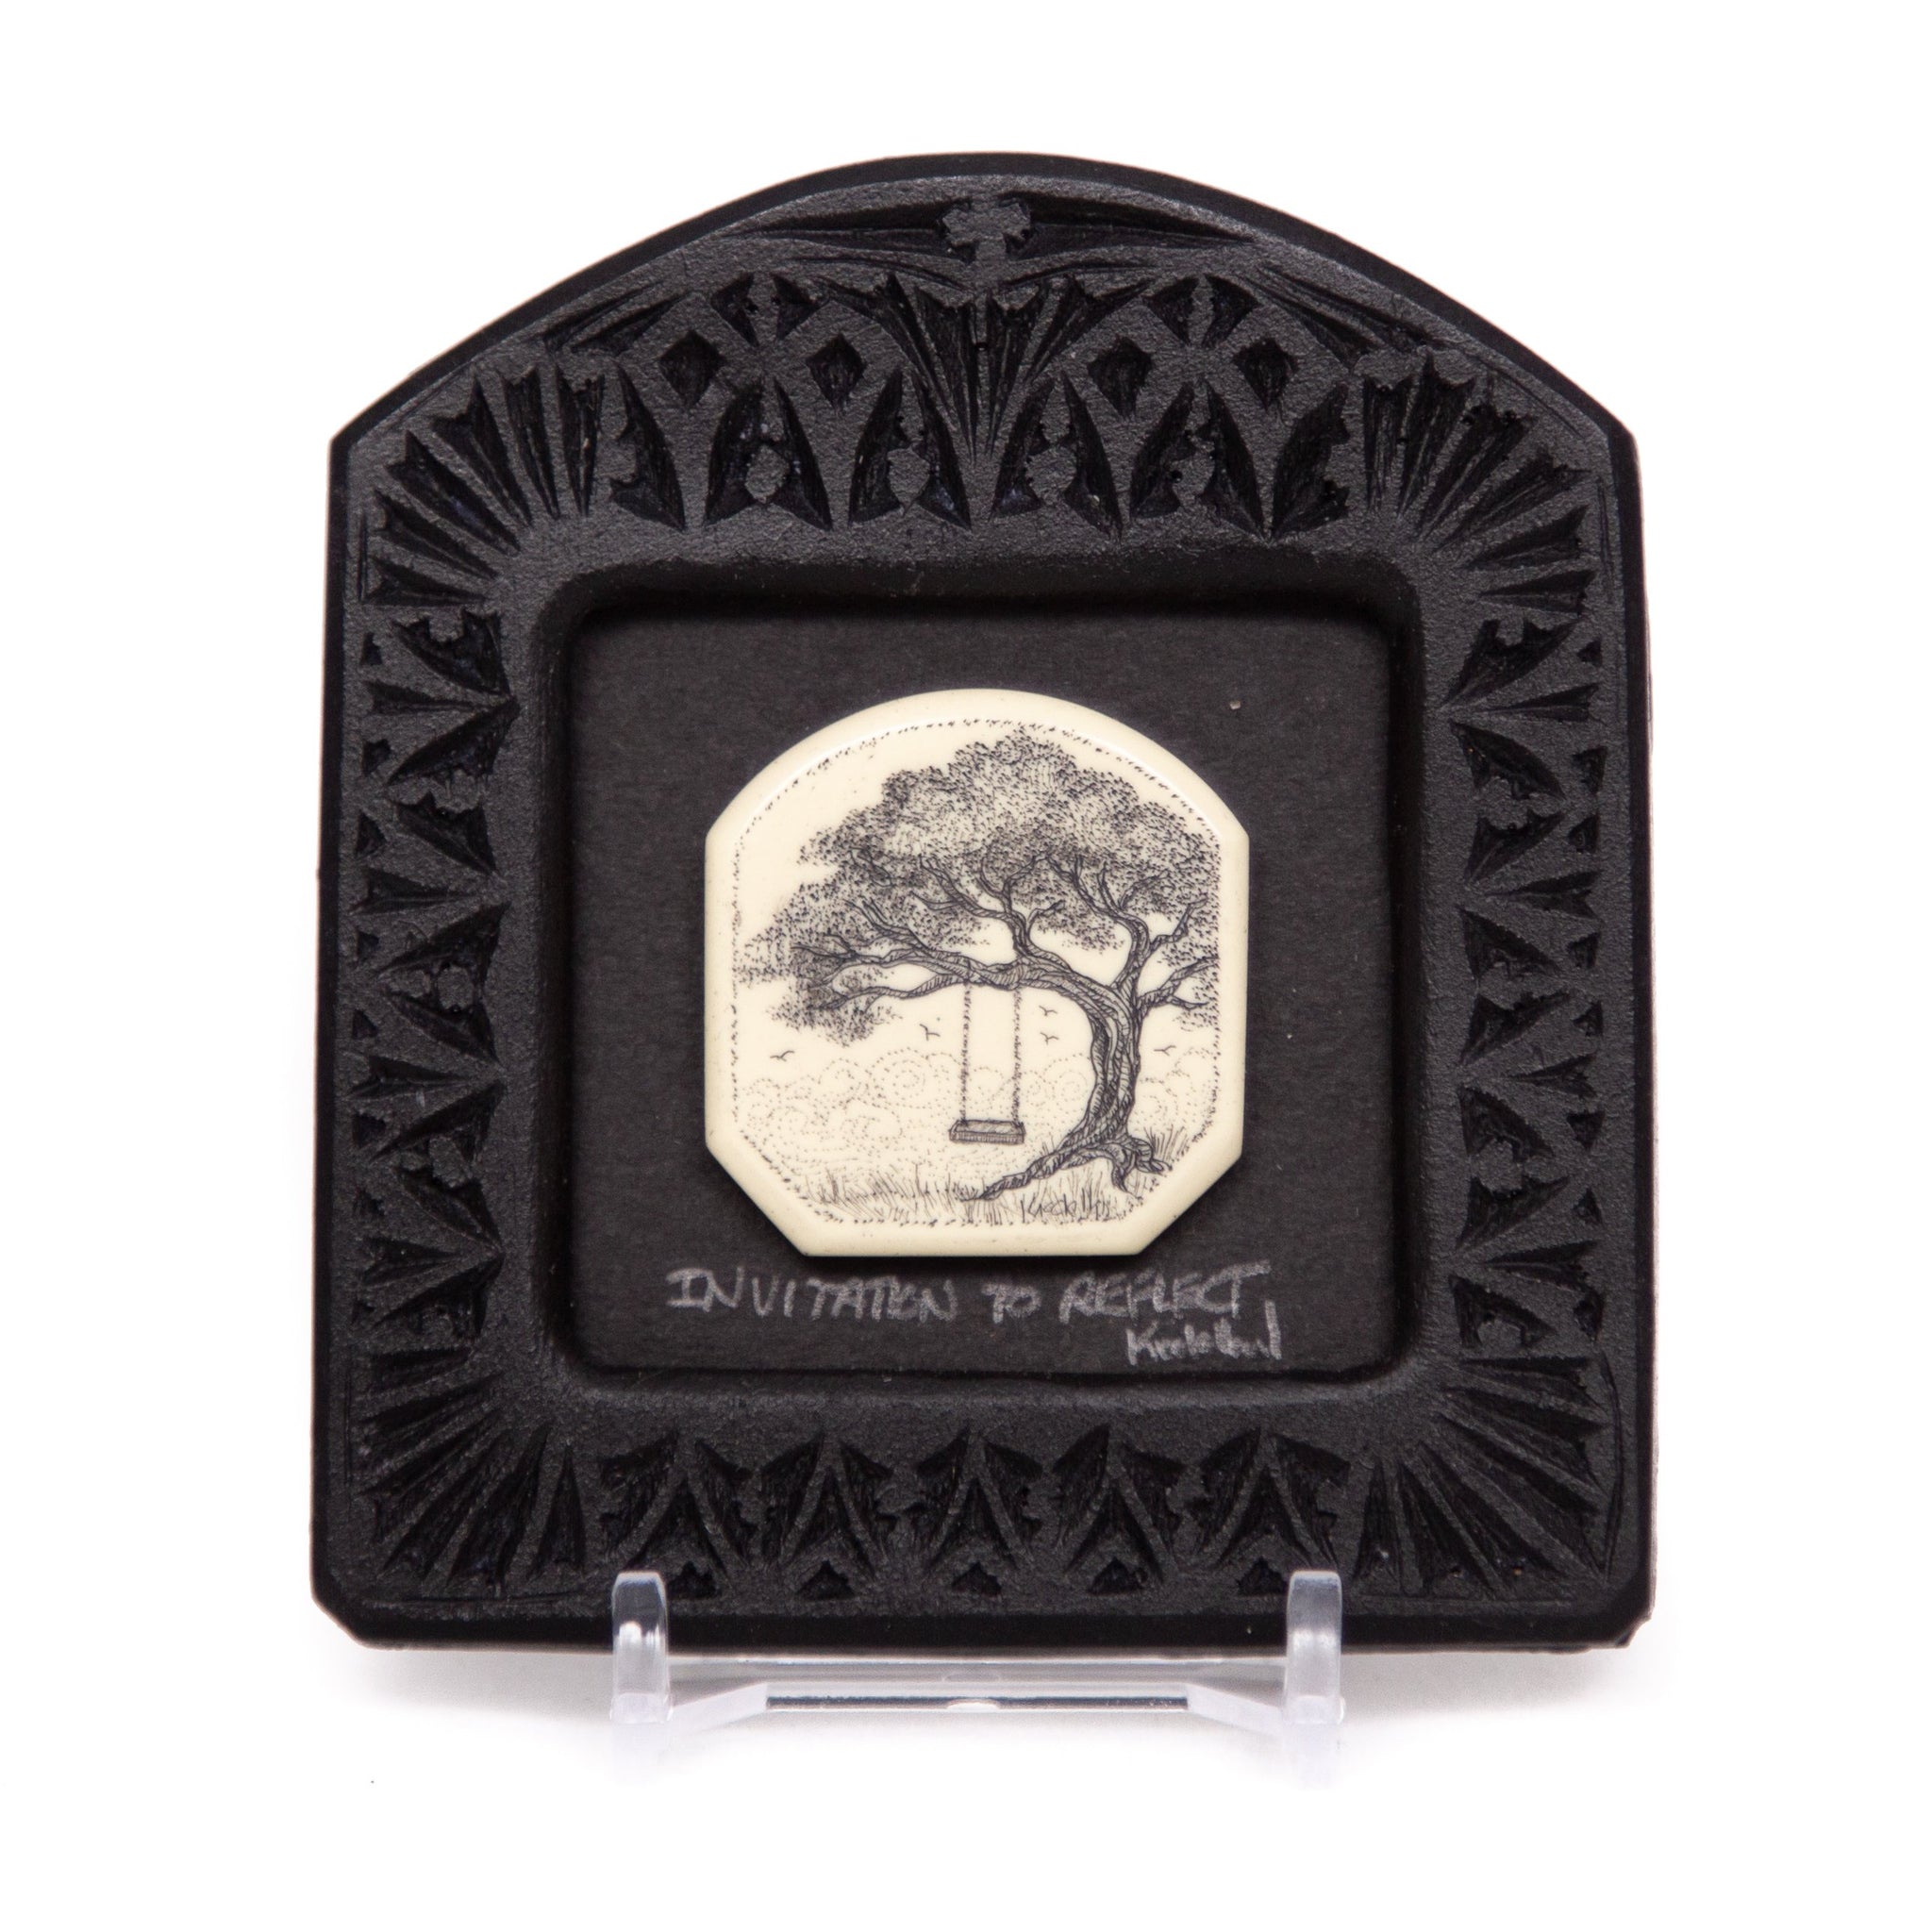 "Invitation to Reflect" Small Chip Carved Frame